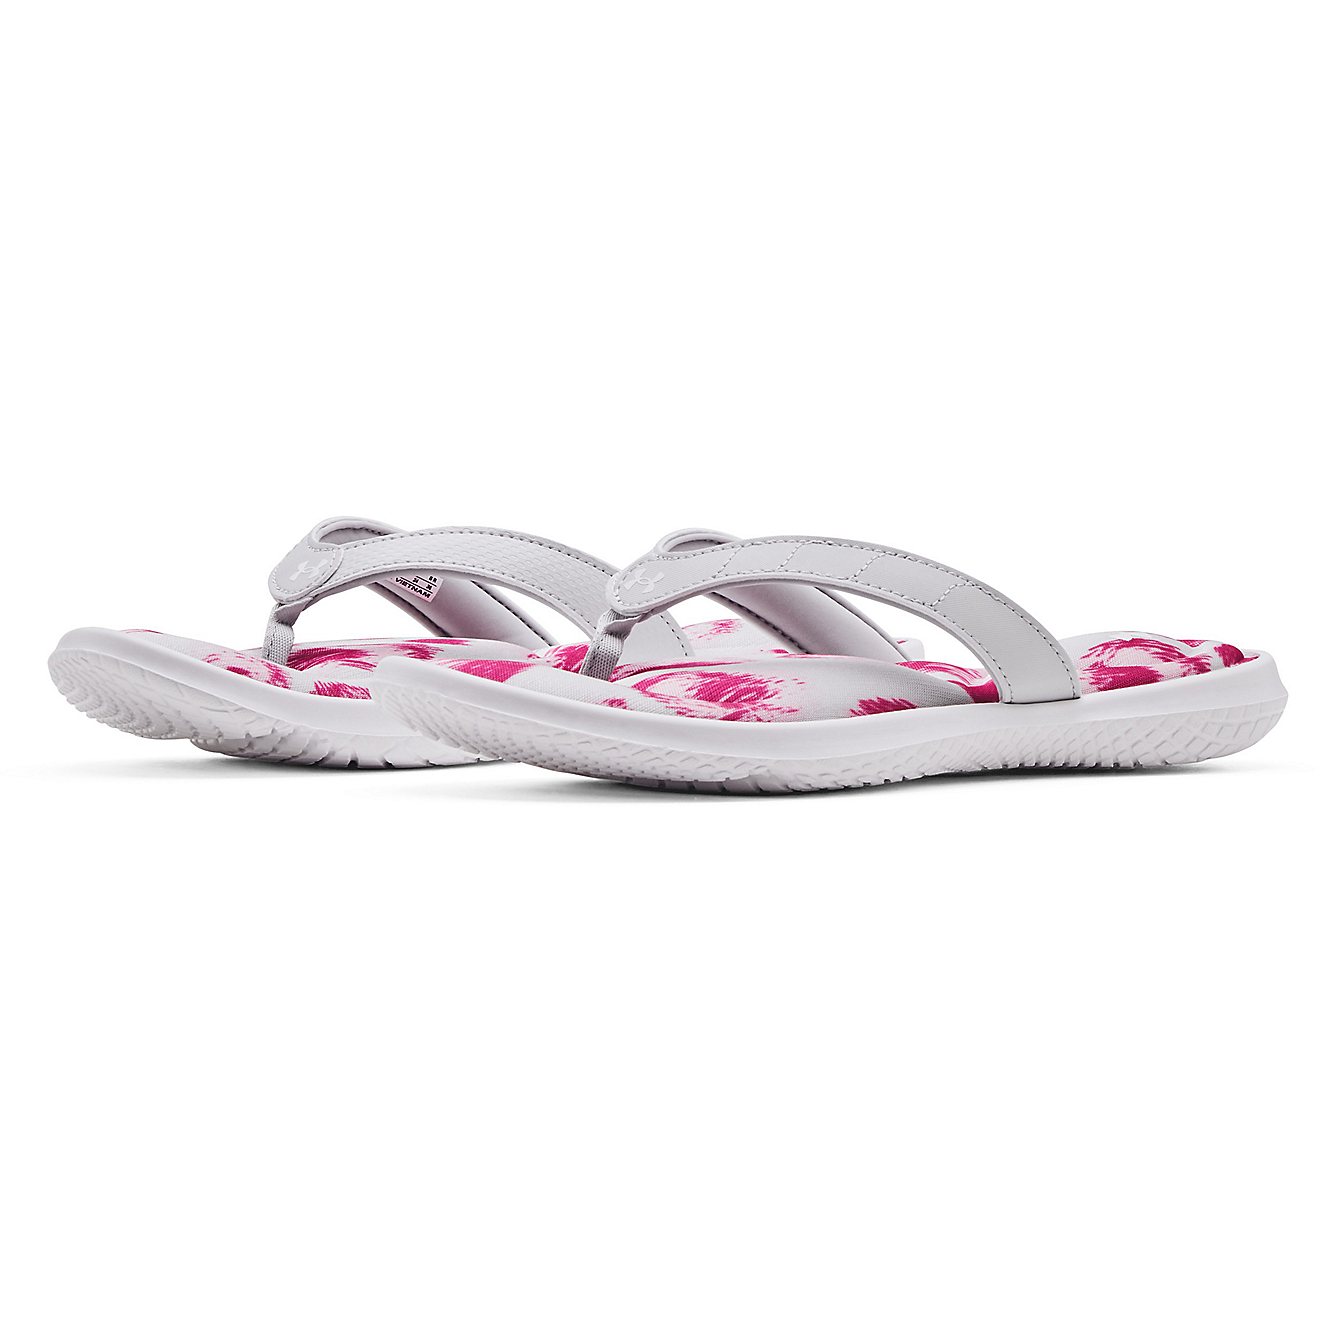 Under Armour Women’s Marbella VII Graphic FB Sandals                                                                           - view number 2